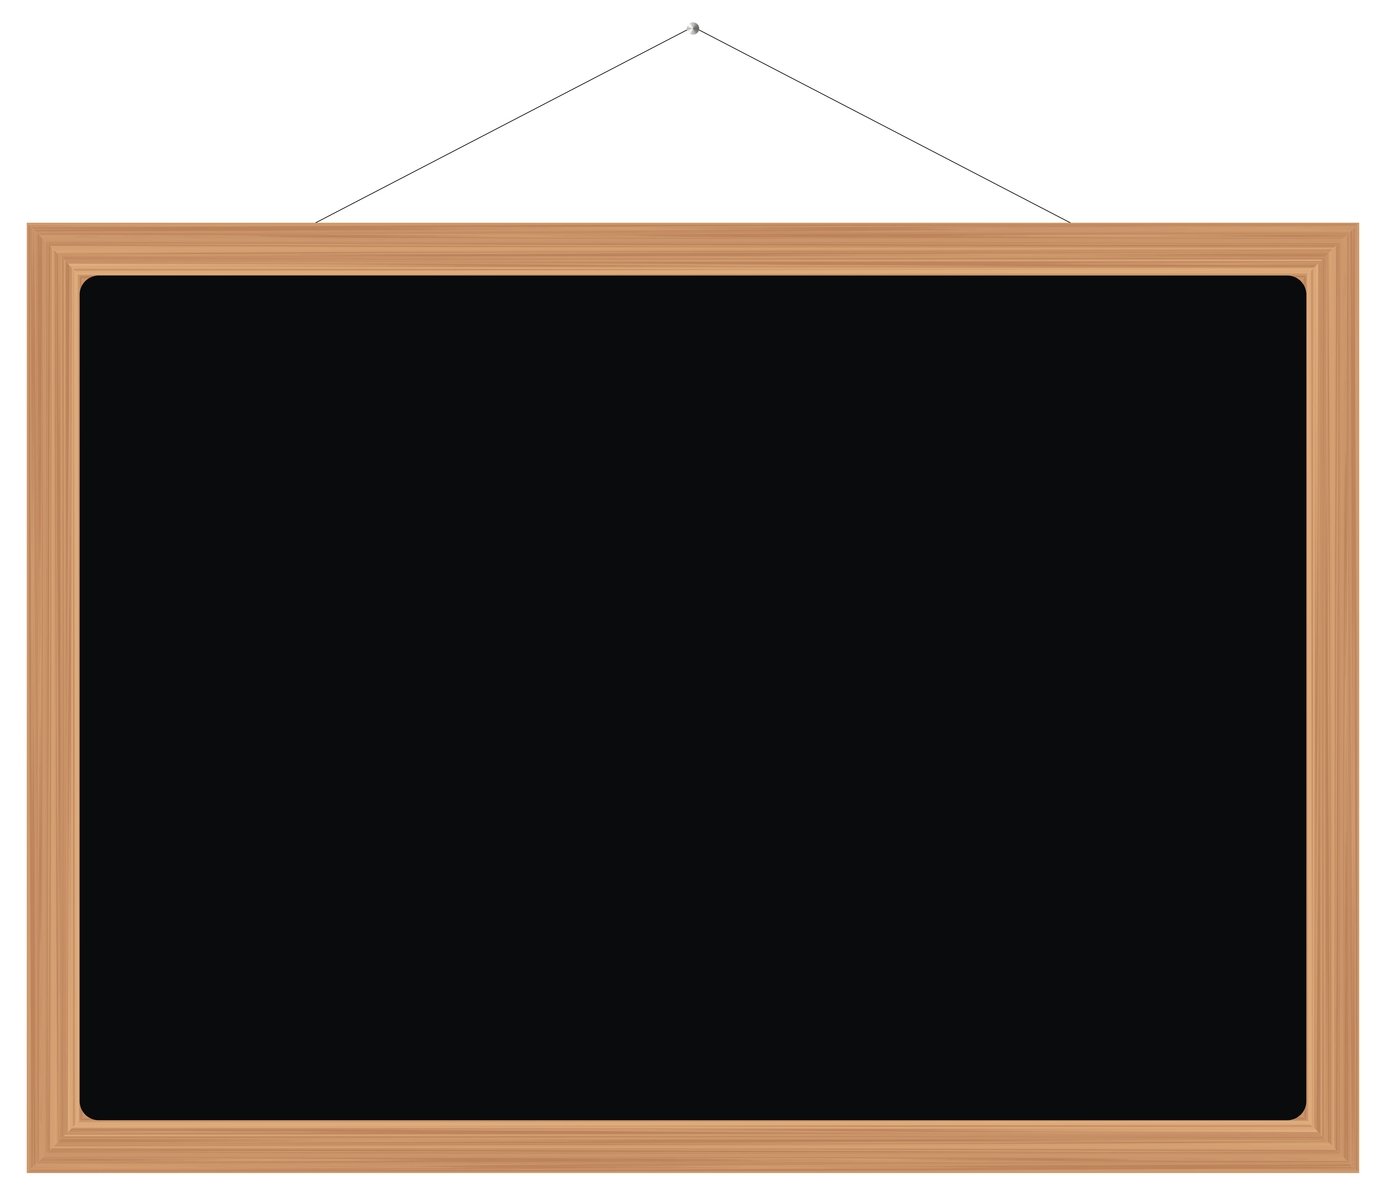 a blackboard with a string hanger hanging on it